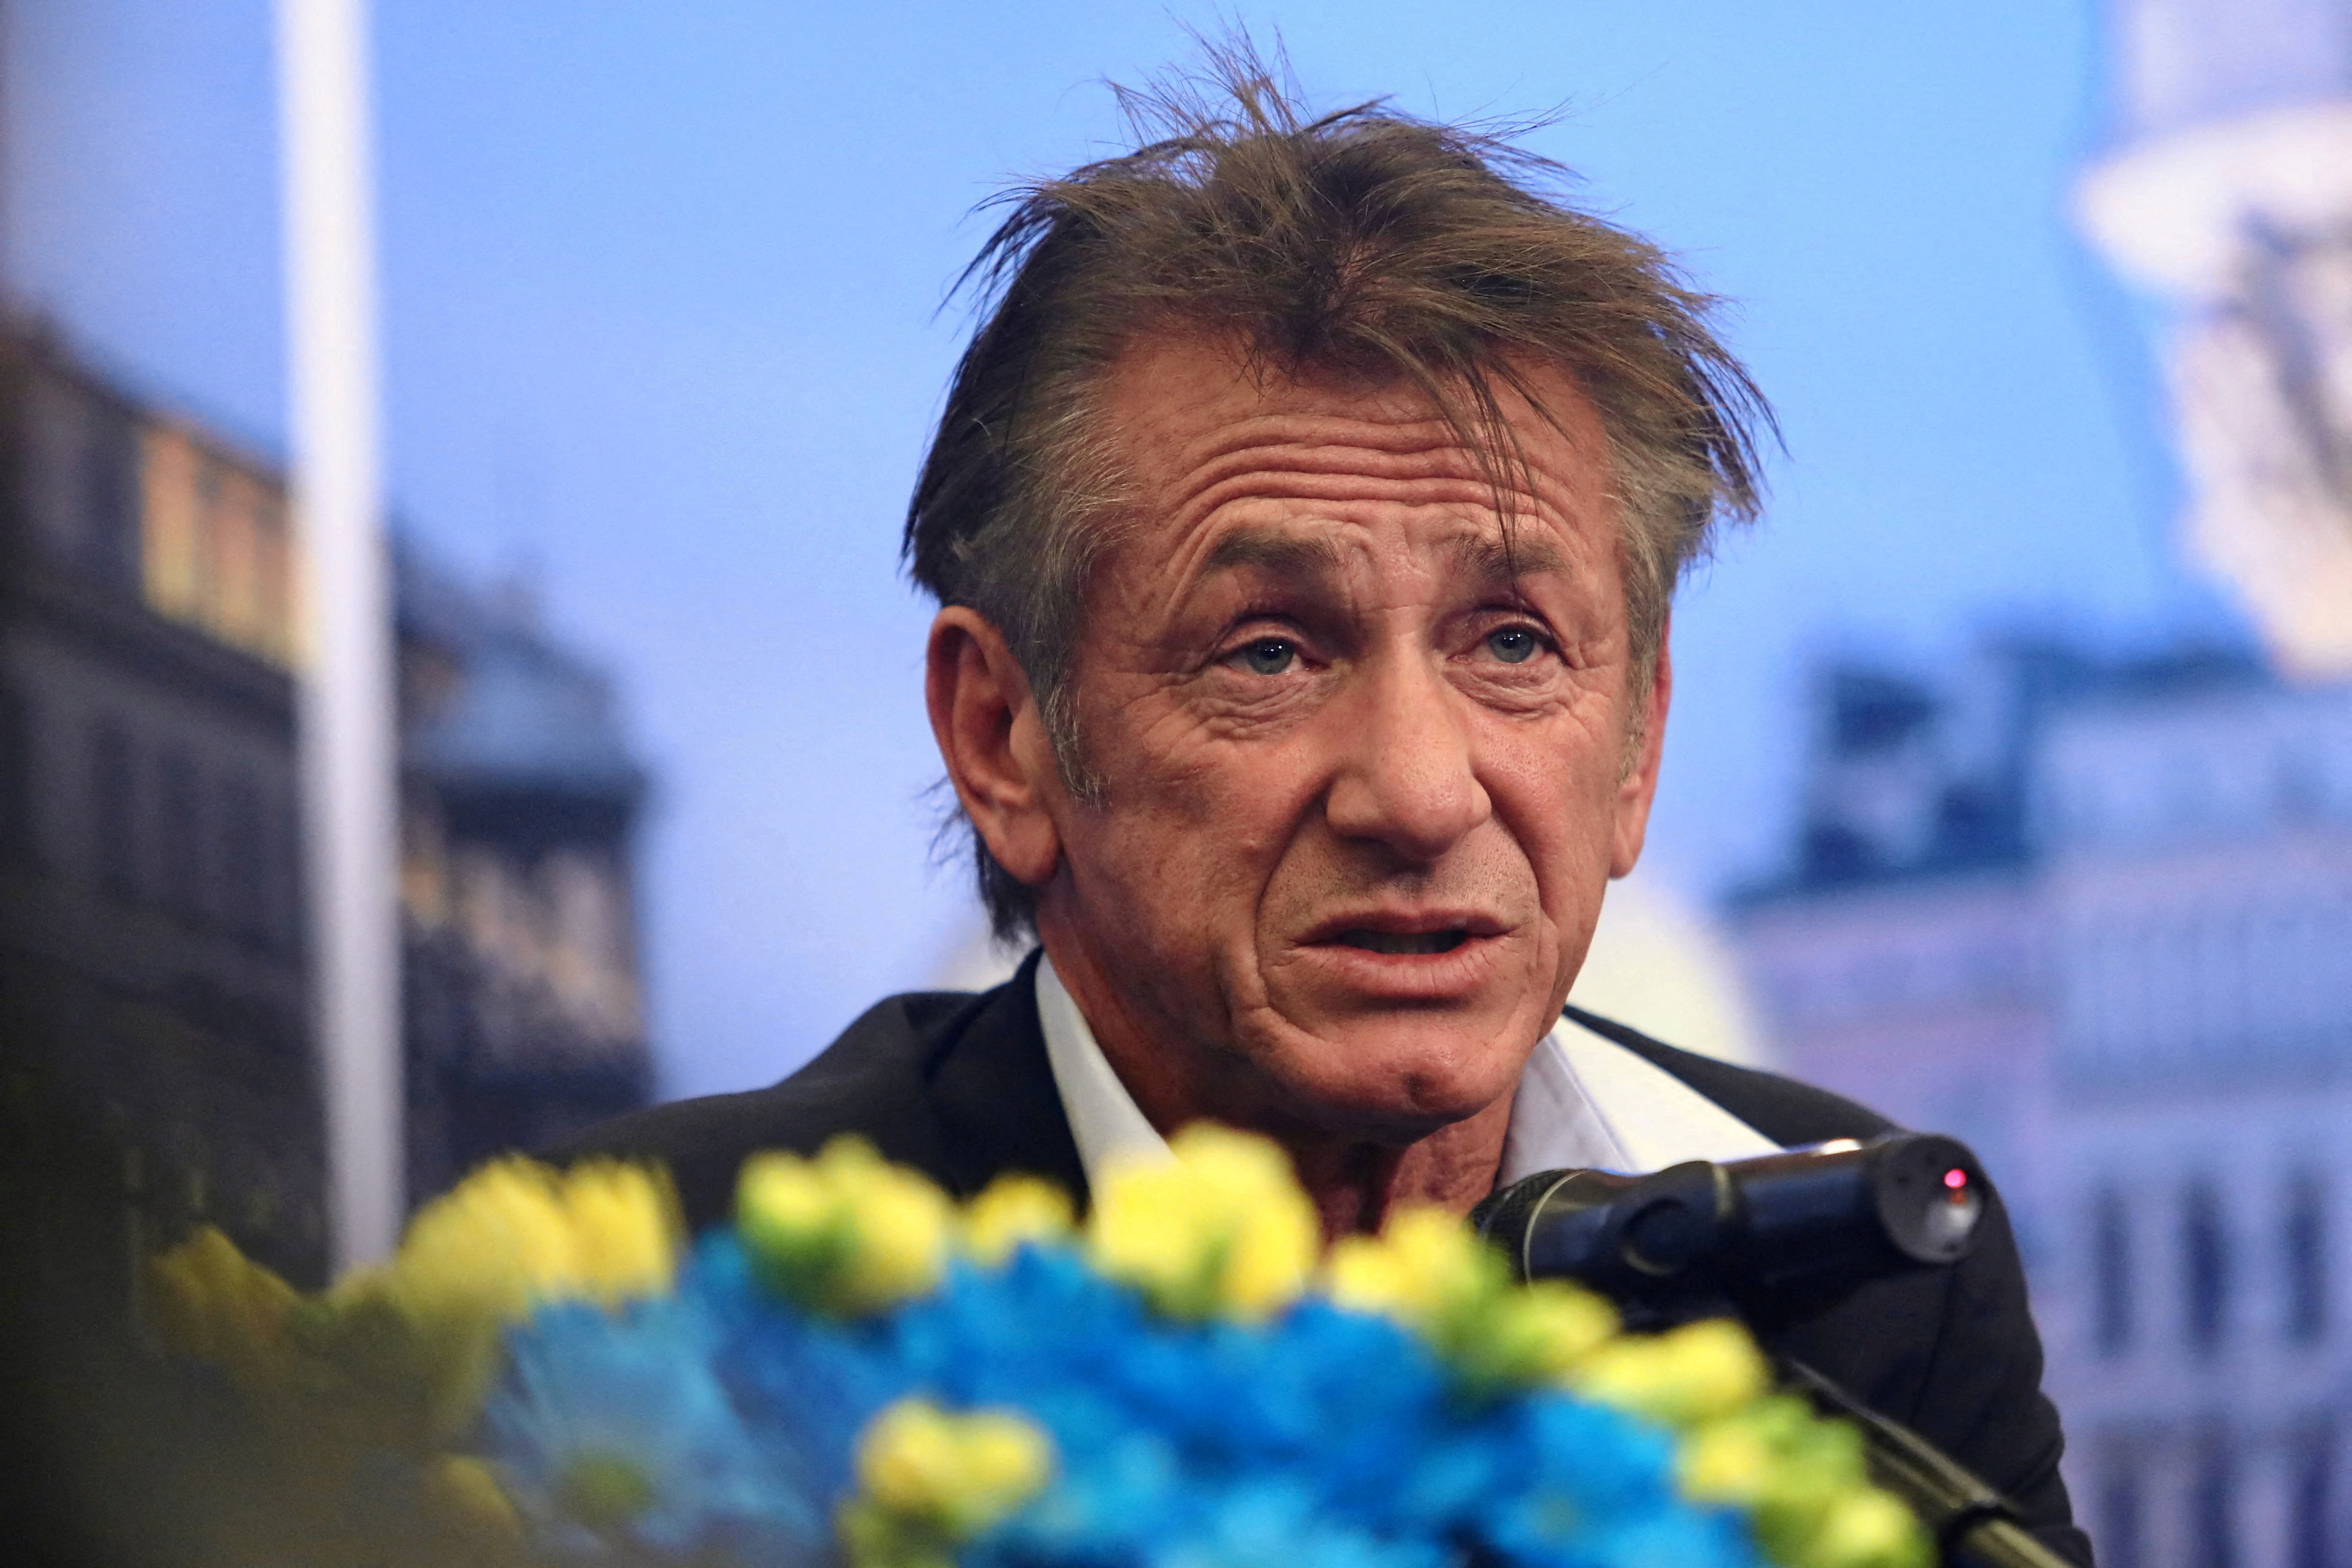 Actor Sean Penn speaks during a news conference as he is to sign a cooperation agreement between the city of Krakow and the CORE Foundation regarding aid for Ukrainian refugees, as Russia's invasion of Ukraine continues, in Krakow, Poland March 23, 2022. Jakub Porzycki/Agencja Wyborcza.pl via REUTERS ATTENTION EDITORS - THIS IMAGE WAS PROVIDED BY A THIRD PARTY. POLAND OUT. NO COMMERCIAL OR EDITORIAL SALES IN POLAND.